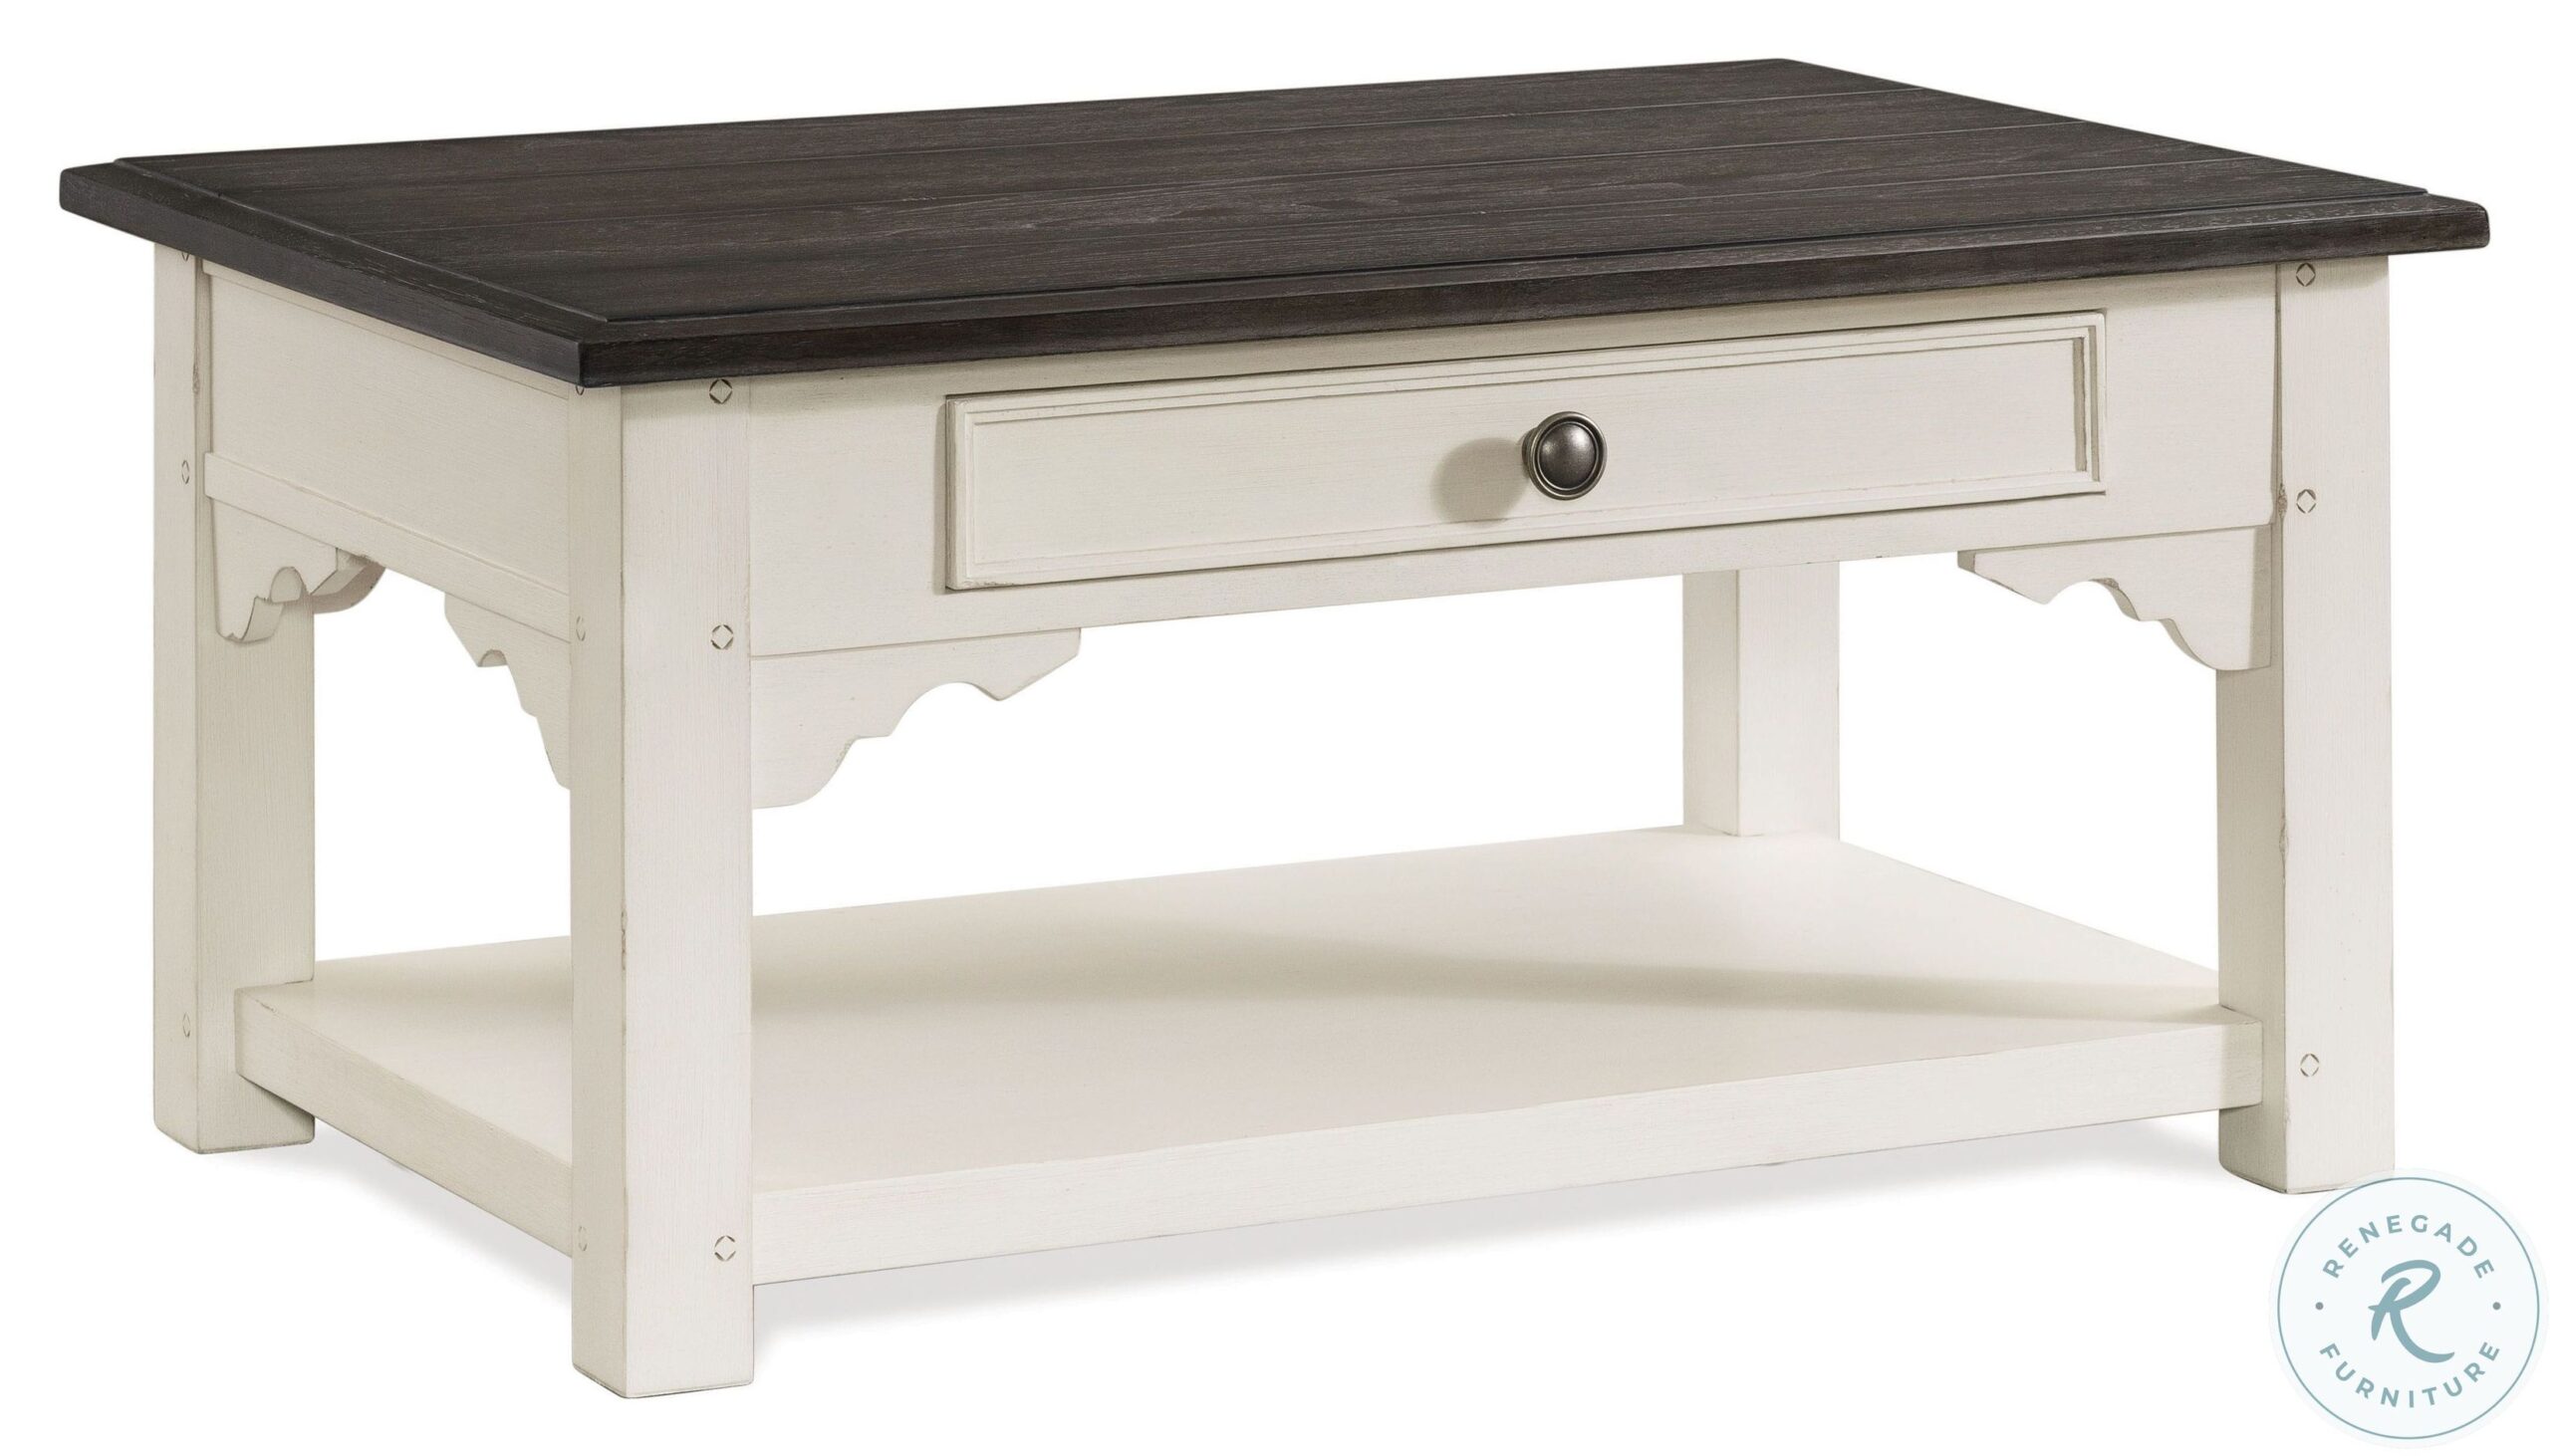 Grand Haven Feathered White And Rich Charcoal Small Cocktail Table1 scaled